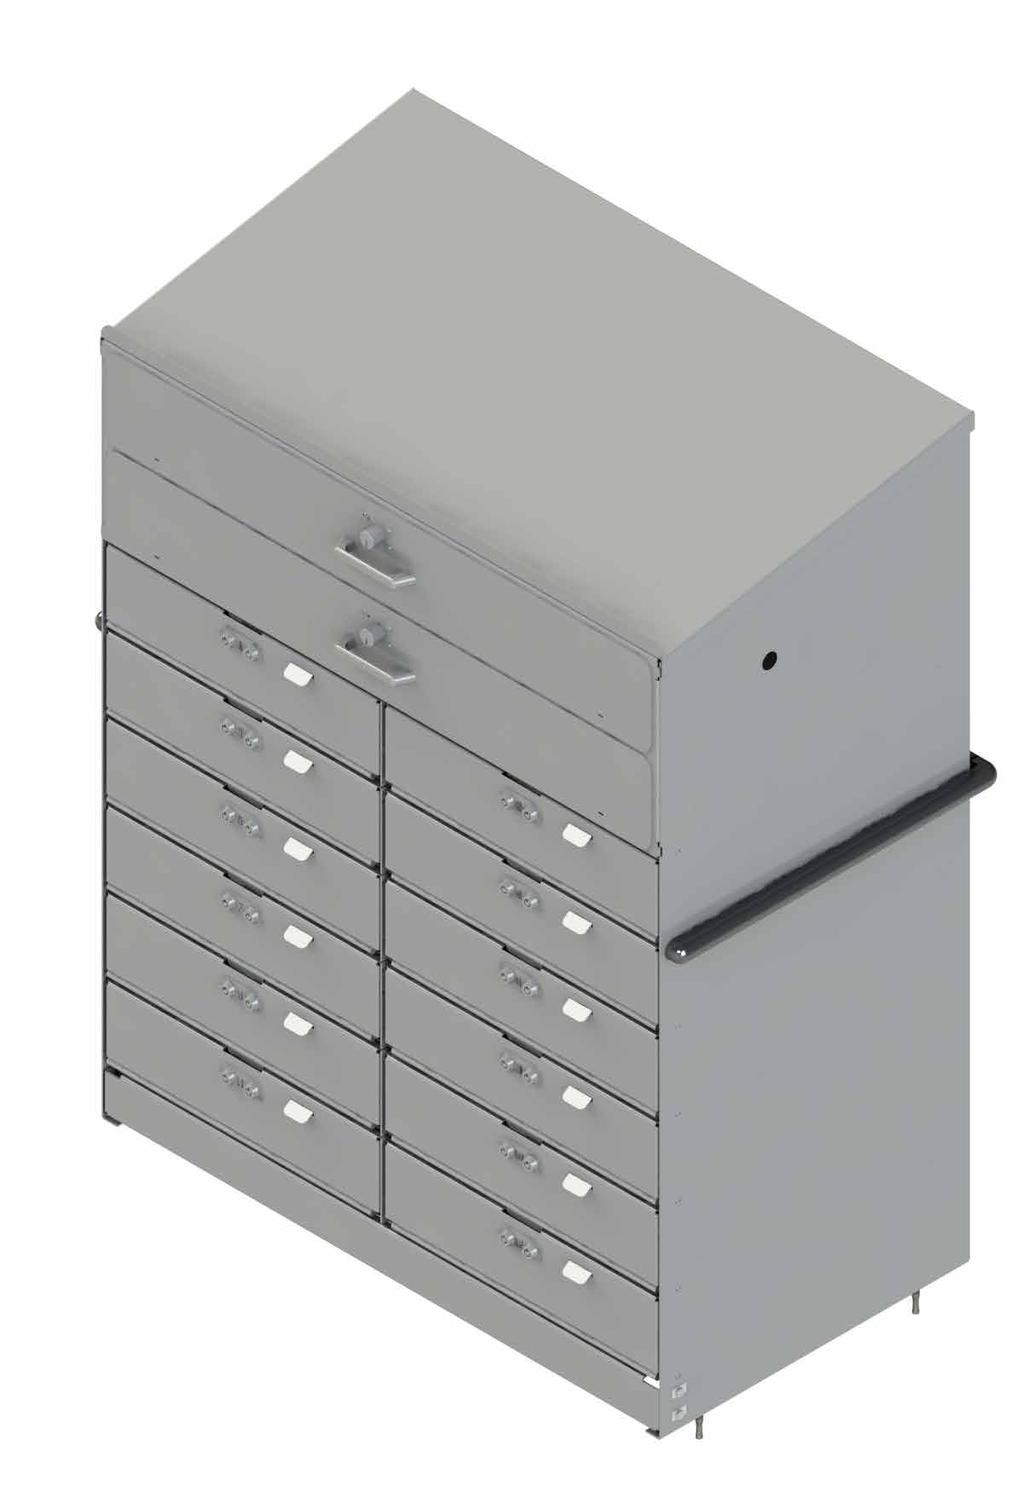 drawers at top of cabinet secure any valuables with lock. Large drawer dims: 35 W x 20 L x 5.